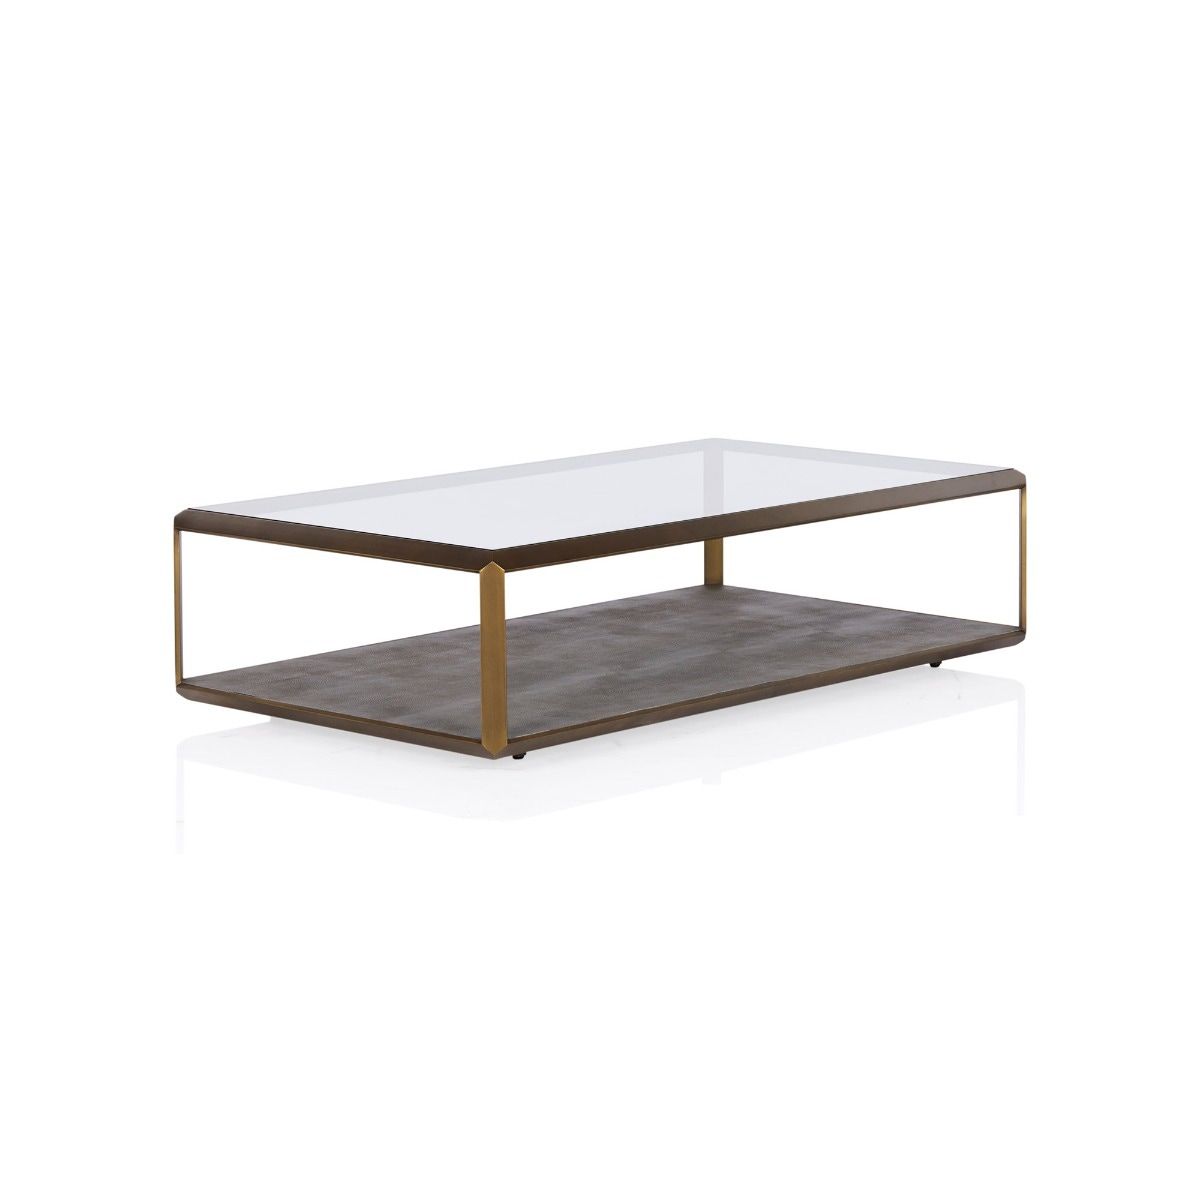 Shop The Max Glass Coffee Table Online In Australia | Coco Republic With Regard To Glass Open Shelf Coffee Tables (View 15 of 15)